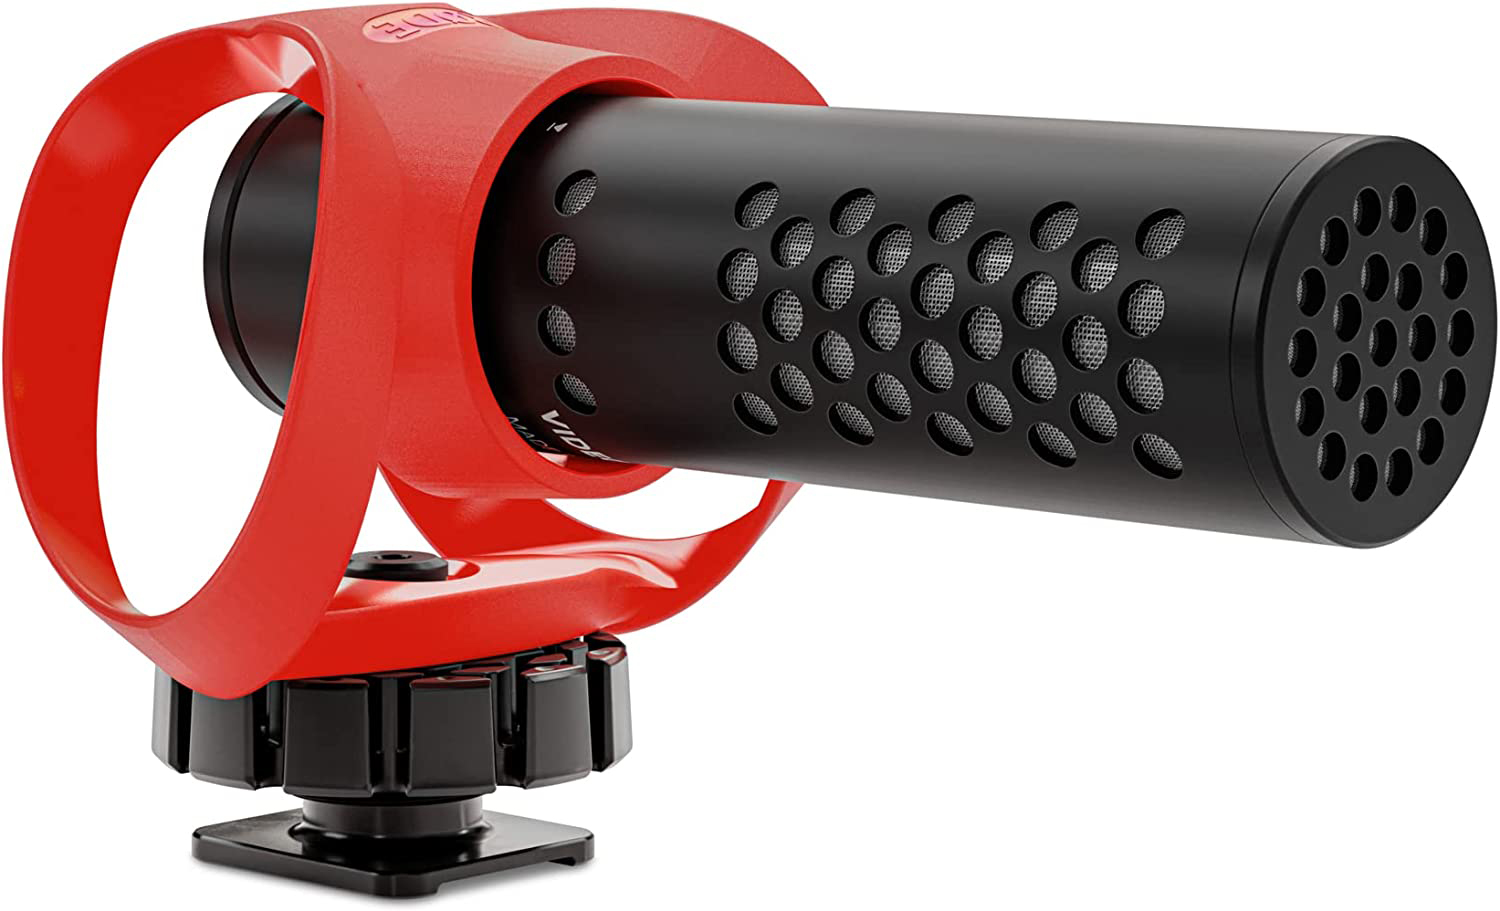 Buy - Rode VideoMicro Compact Microphone Designed for Smaller